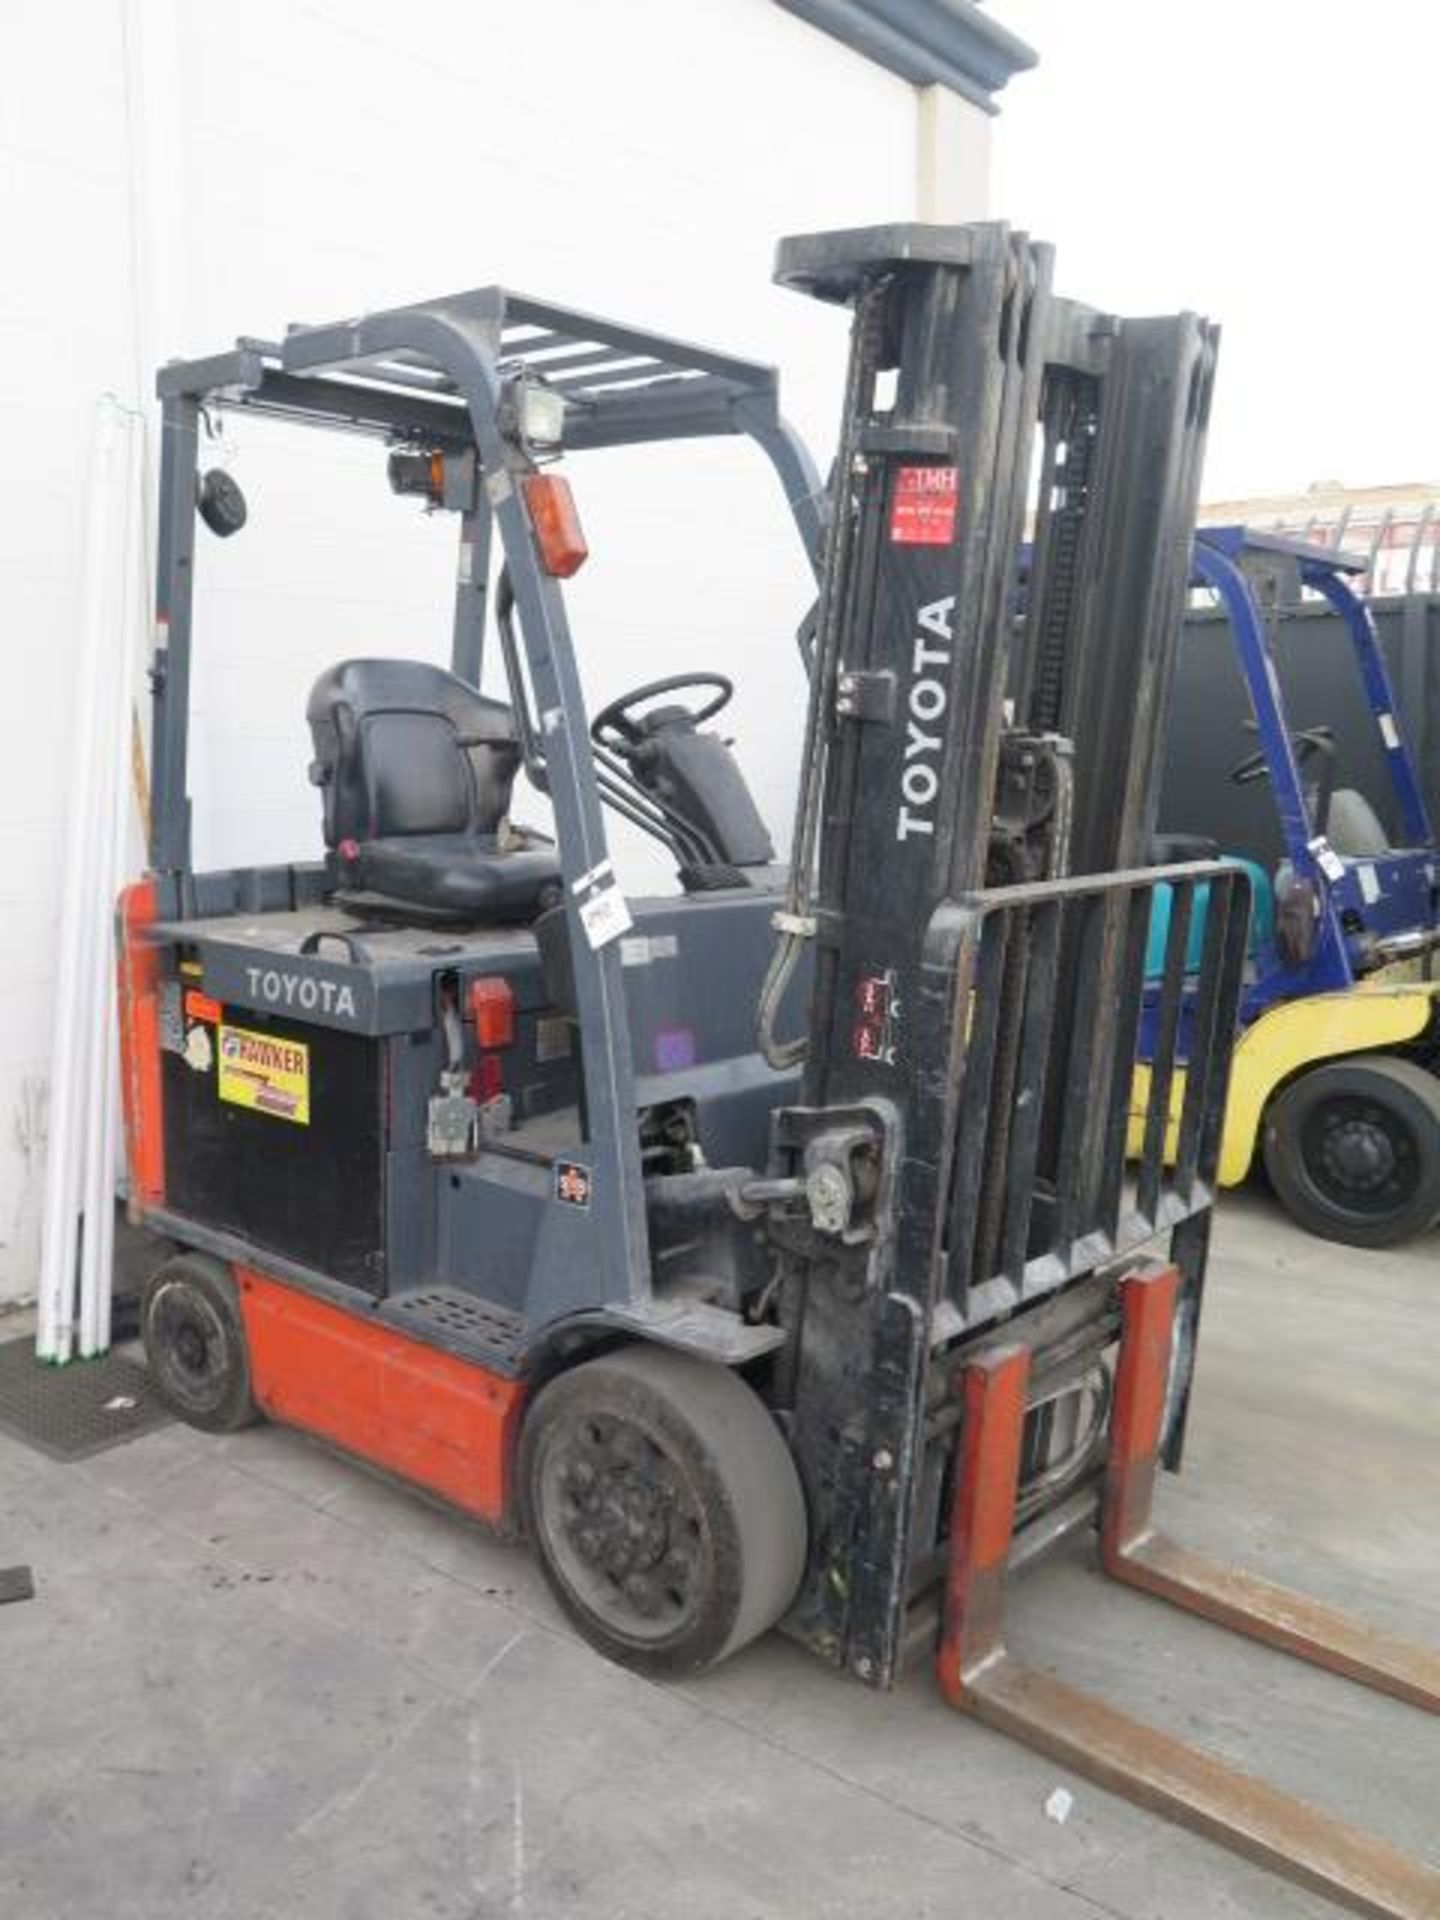 Toyota 8FBCU25 5000 Lb Cap Electric Forklift s/n 64087 w/ 3-Stage Mast, 198” Lift Height, Side